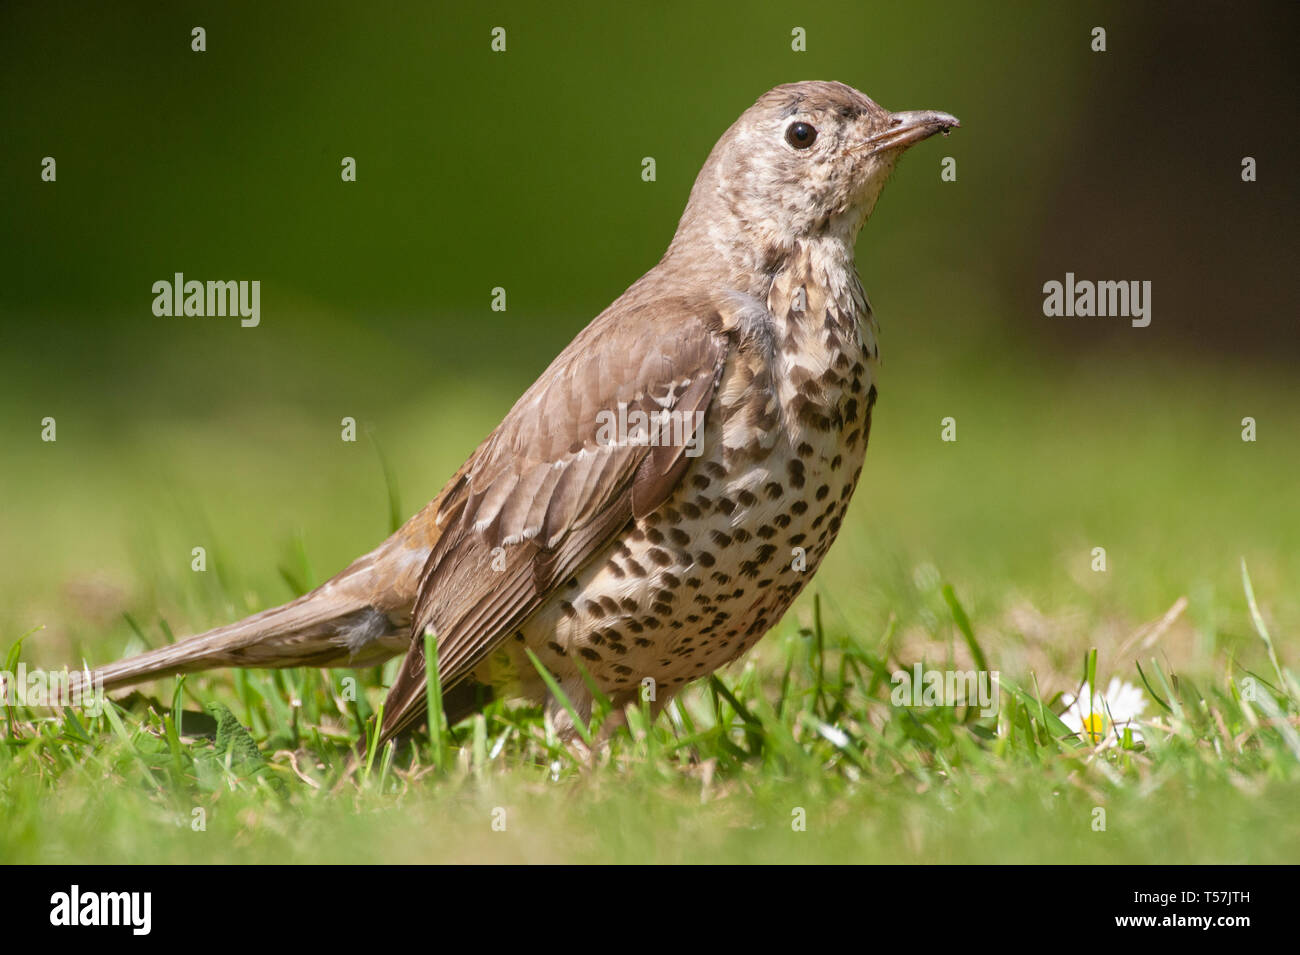 juvenile Mistle Thrush, Turdus viscivorus, waiting on grass for parent to feed with worms, Queen's Park, London, United Kingdom Stock Photo